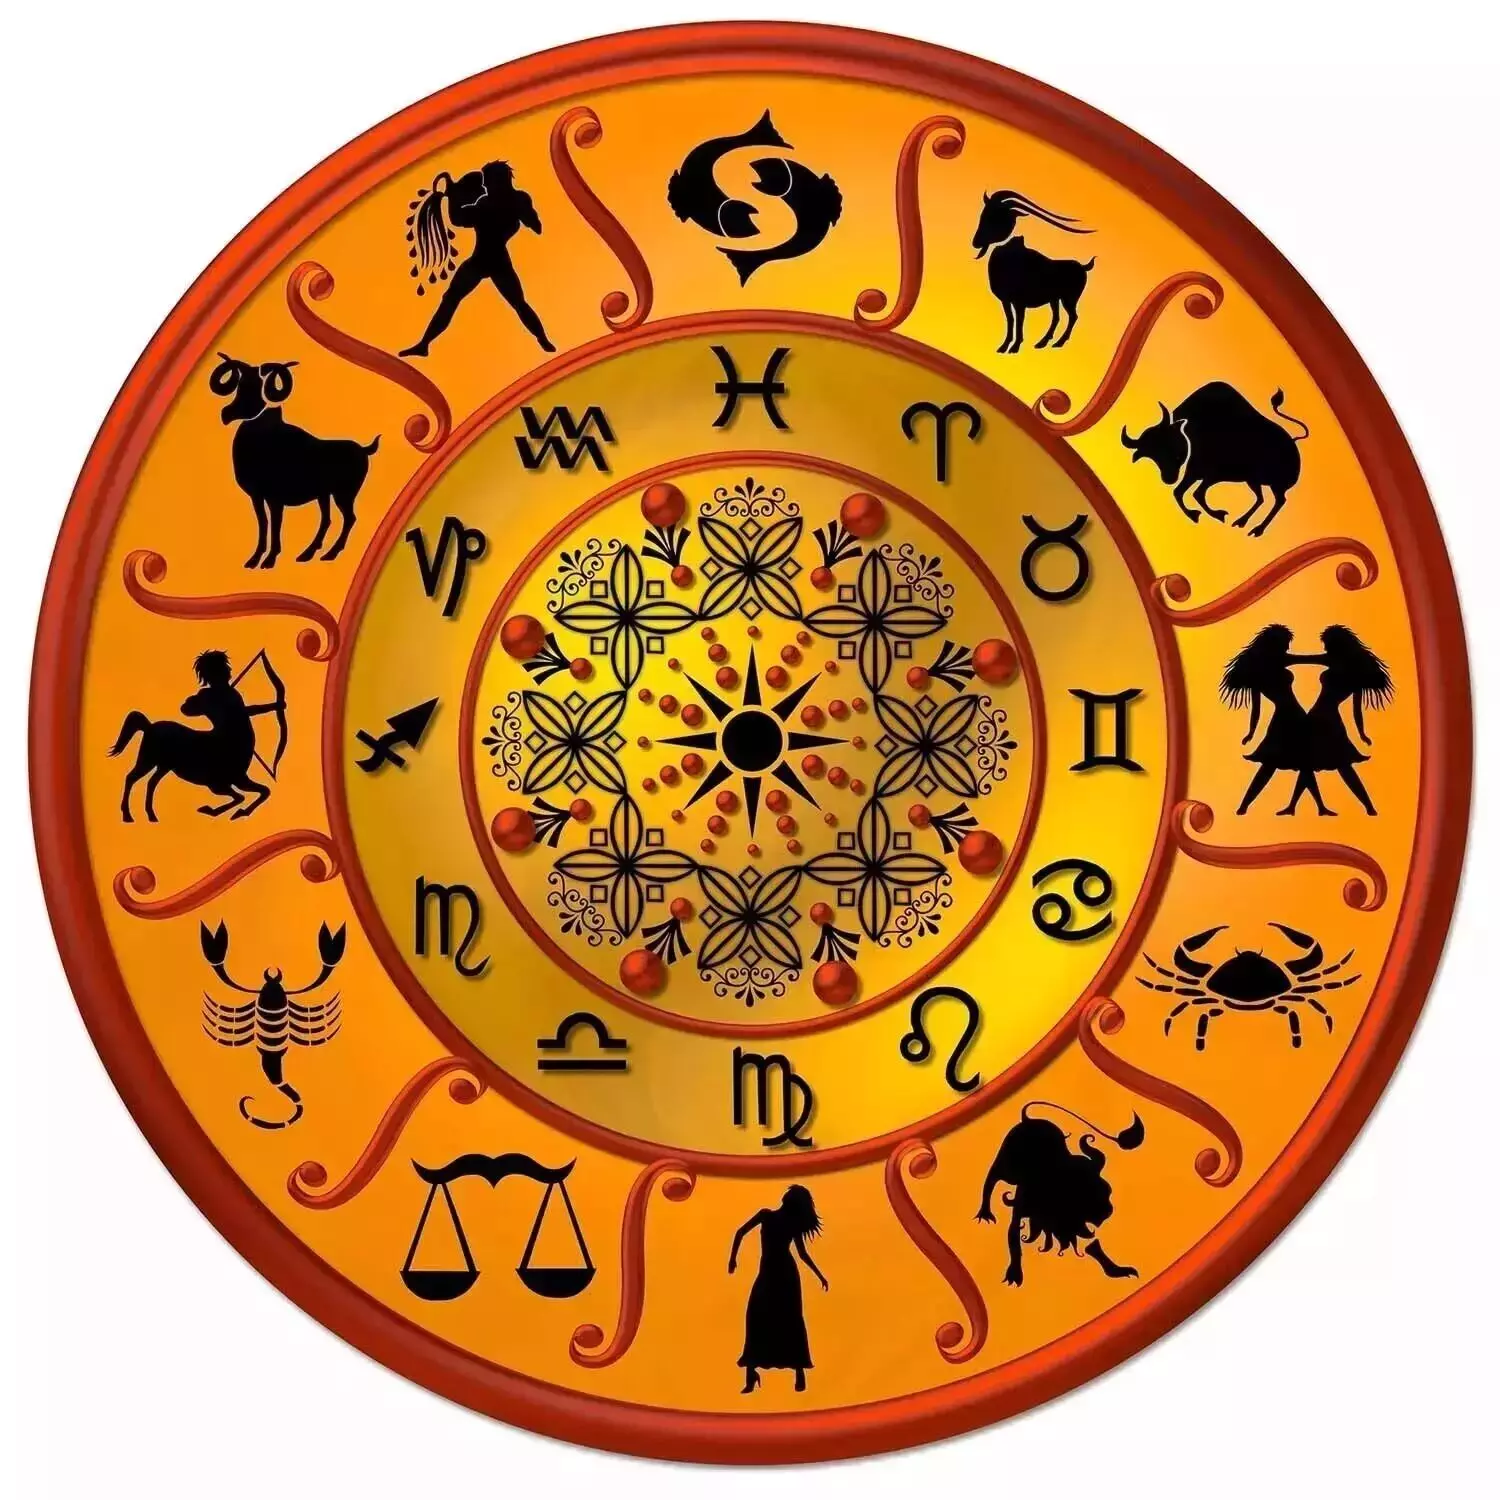 06 April  – Know your todays horoscope